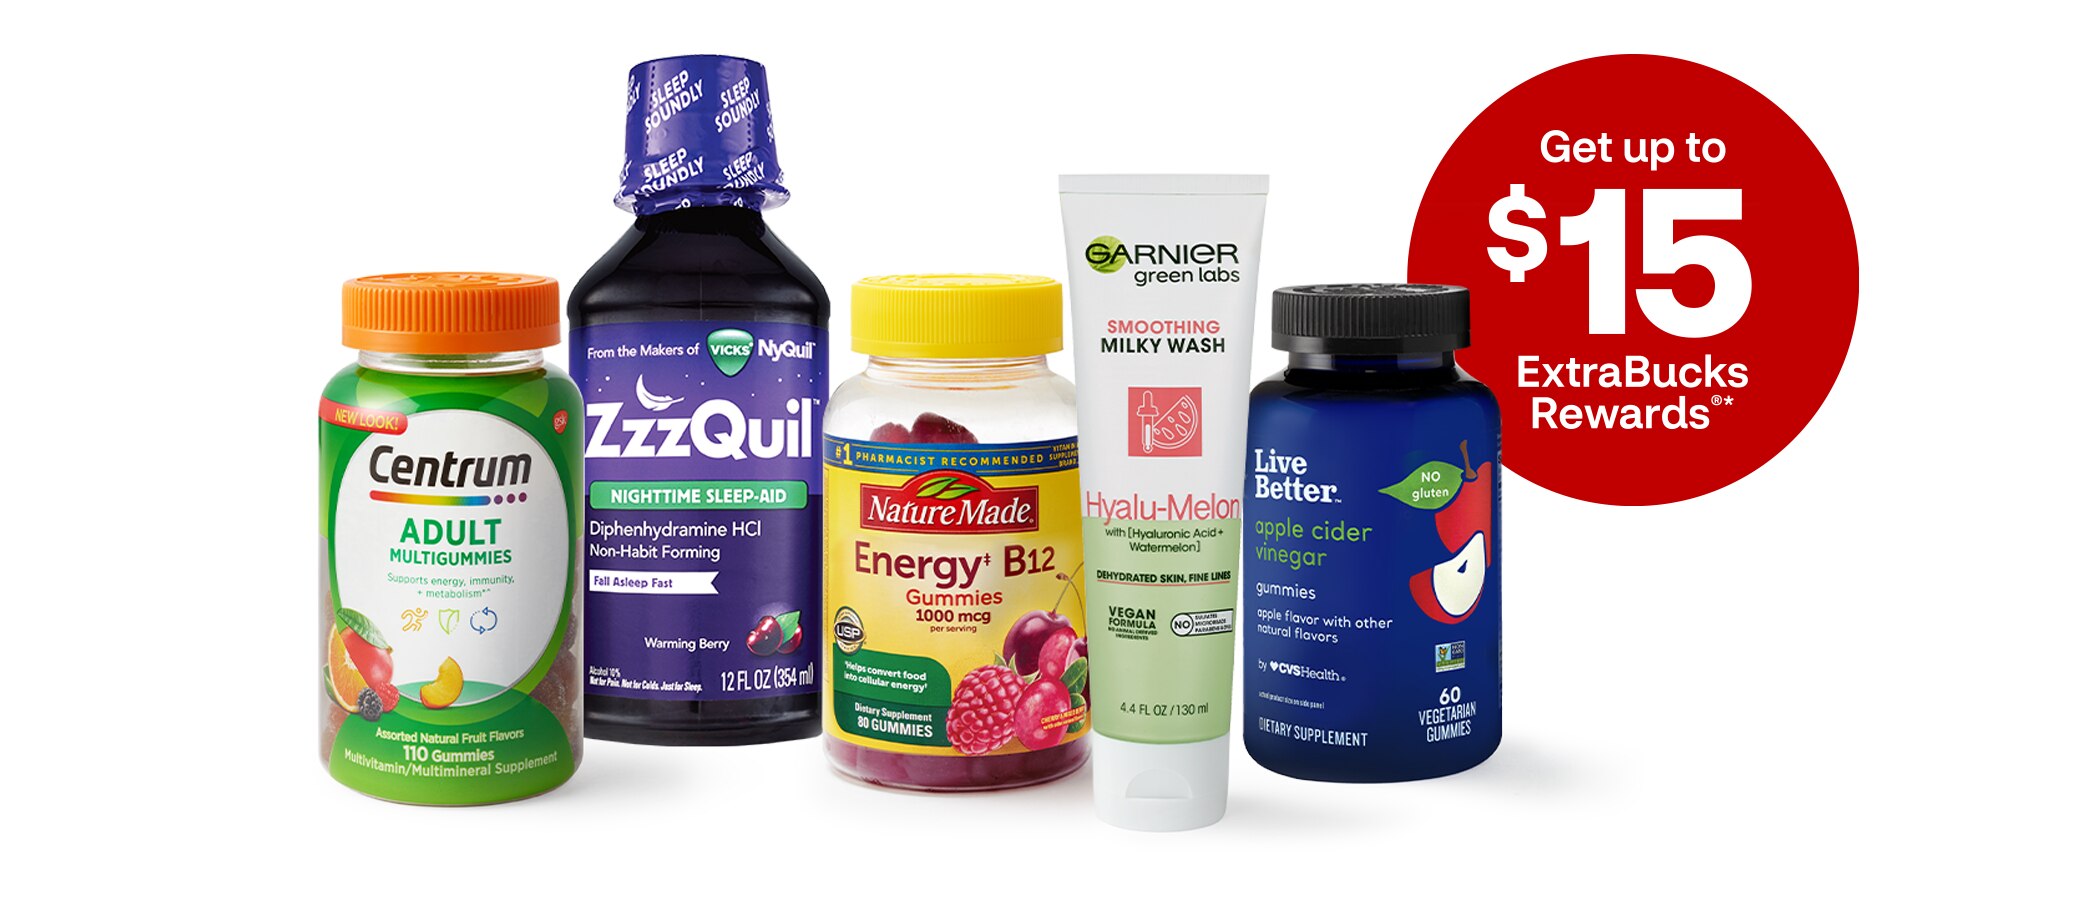 Shop for wellness products, get up to $15 ExtraBucks Rewards®*, showing example products